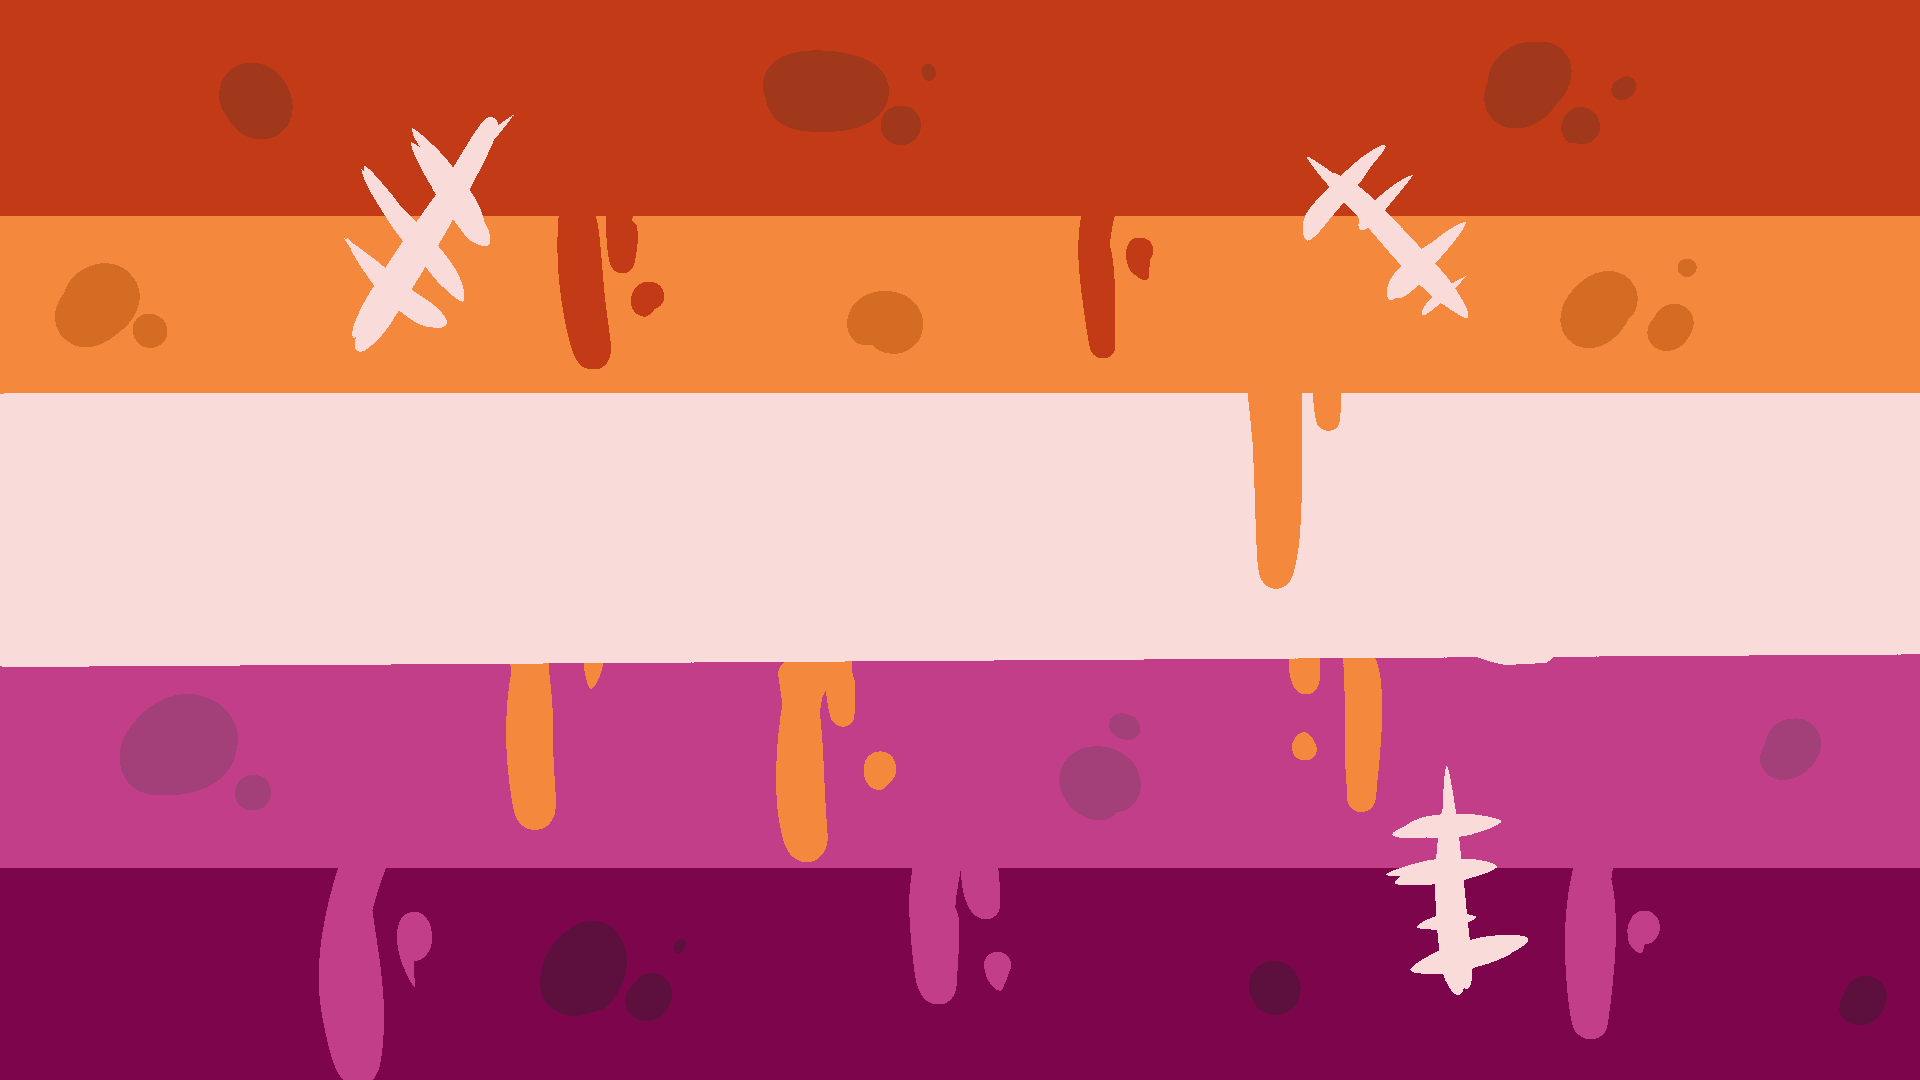 More halloween pride flags (not OC- found lgbt